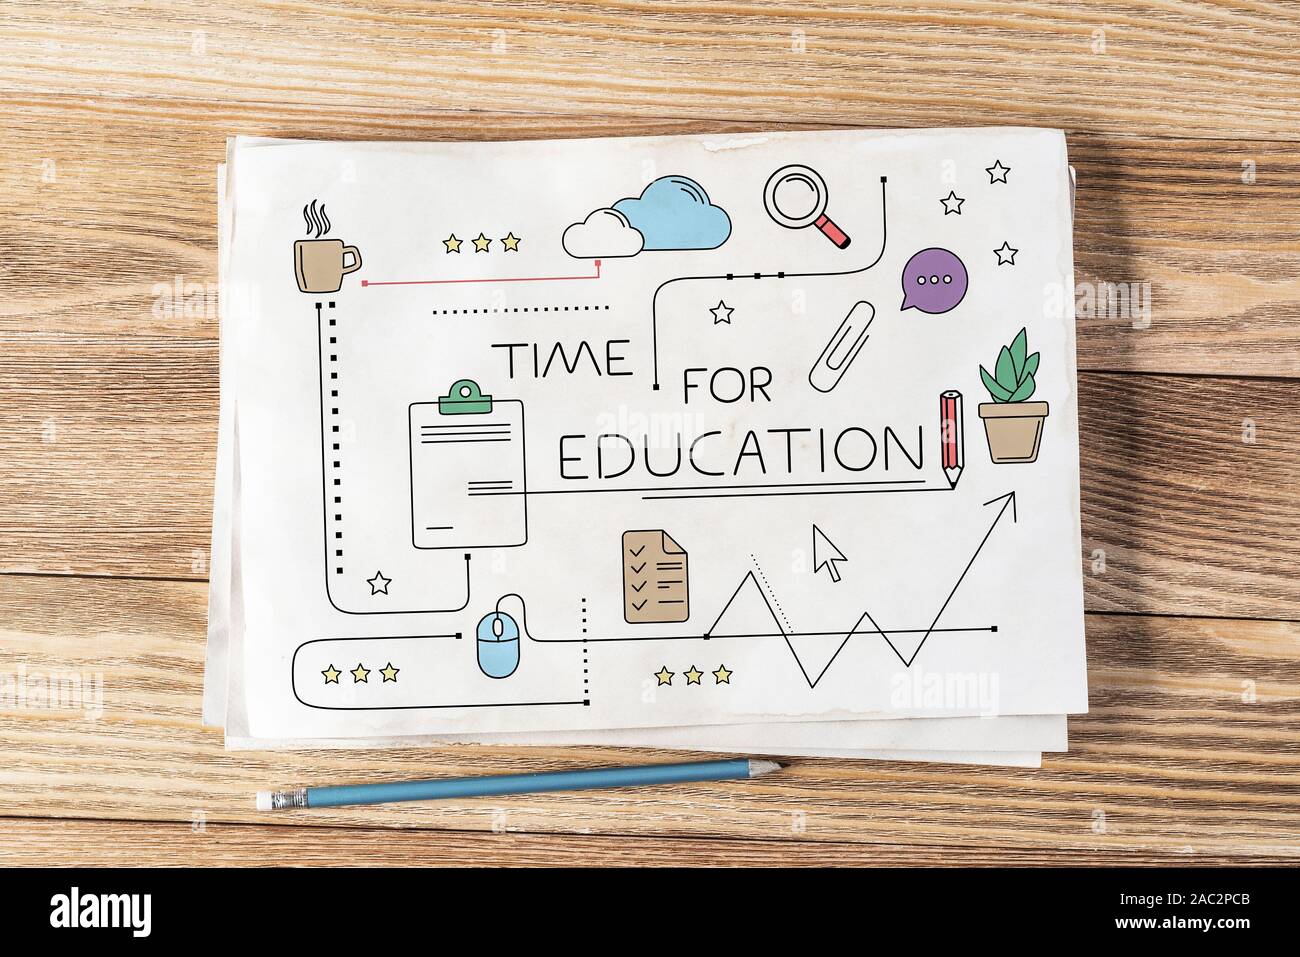 Time for education pencil hand drawn Stock Photo